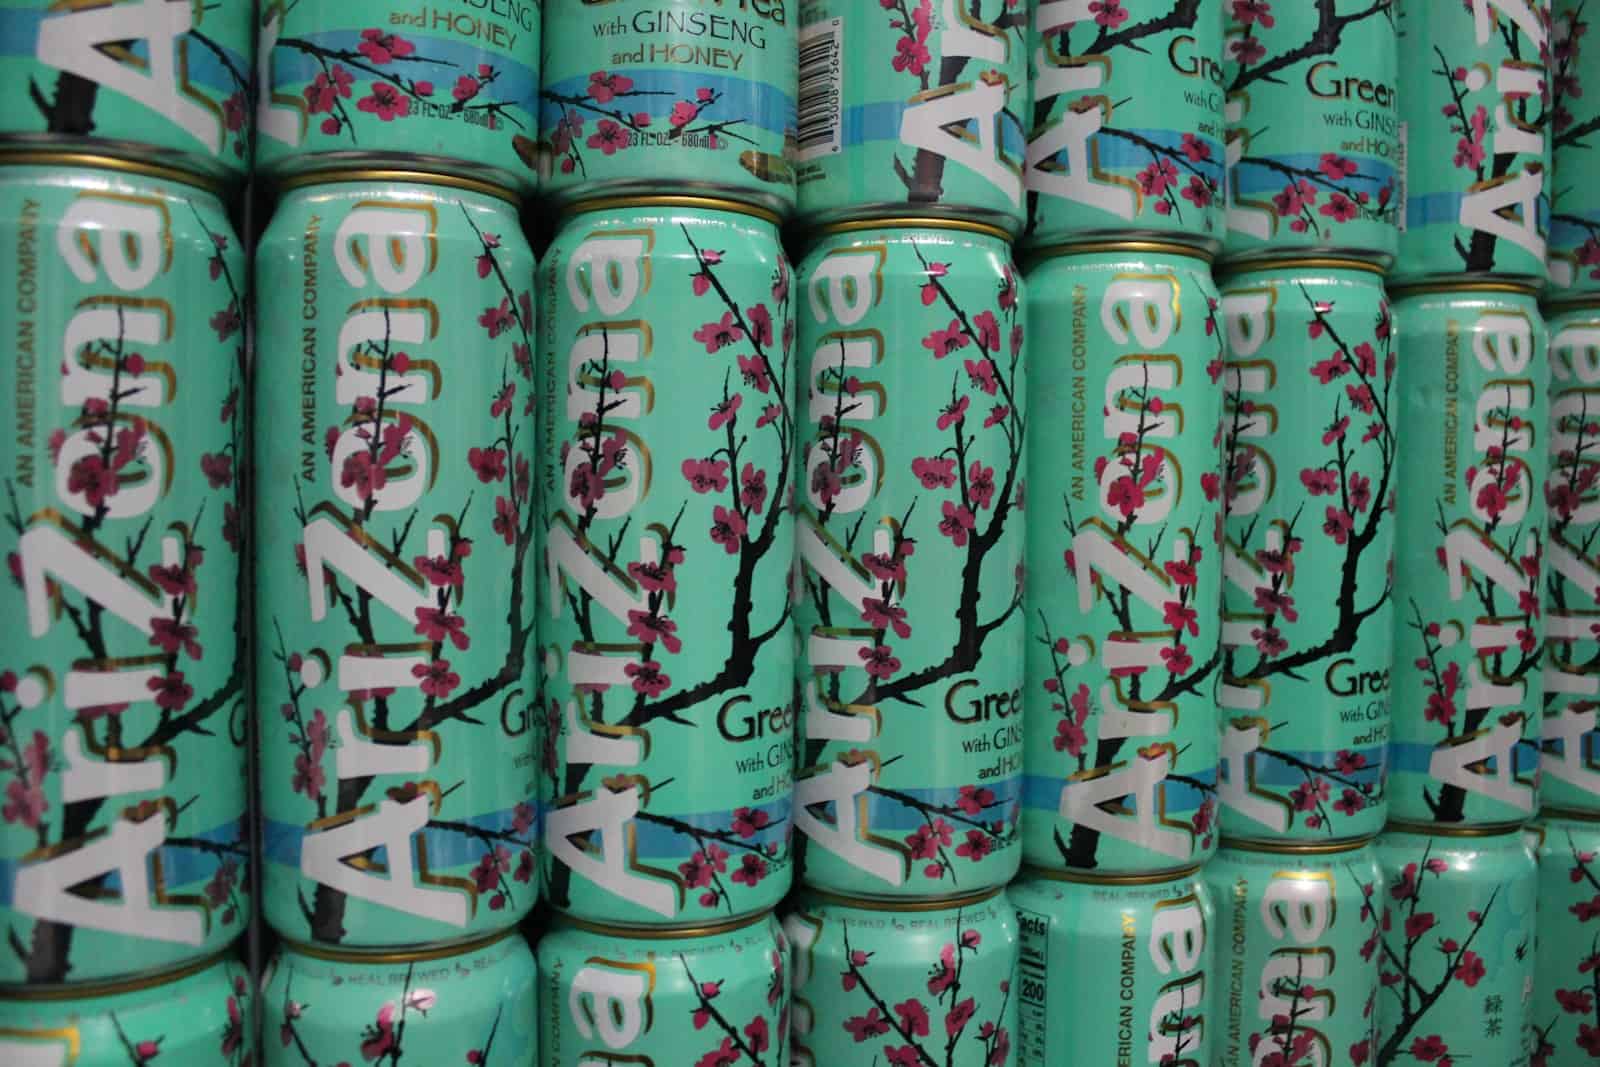 a large stack of tea cans with cherry blossoms on them